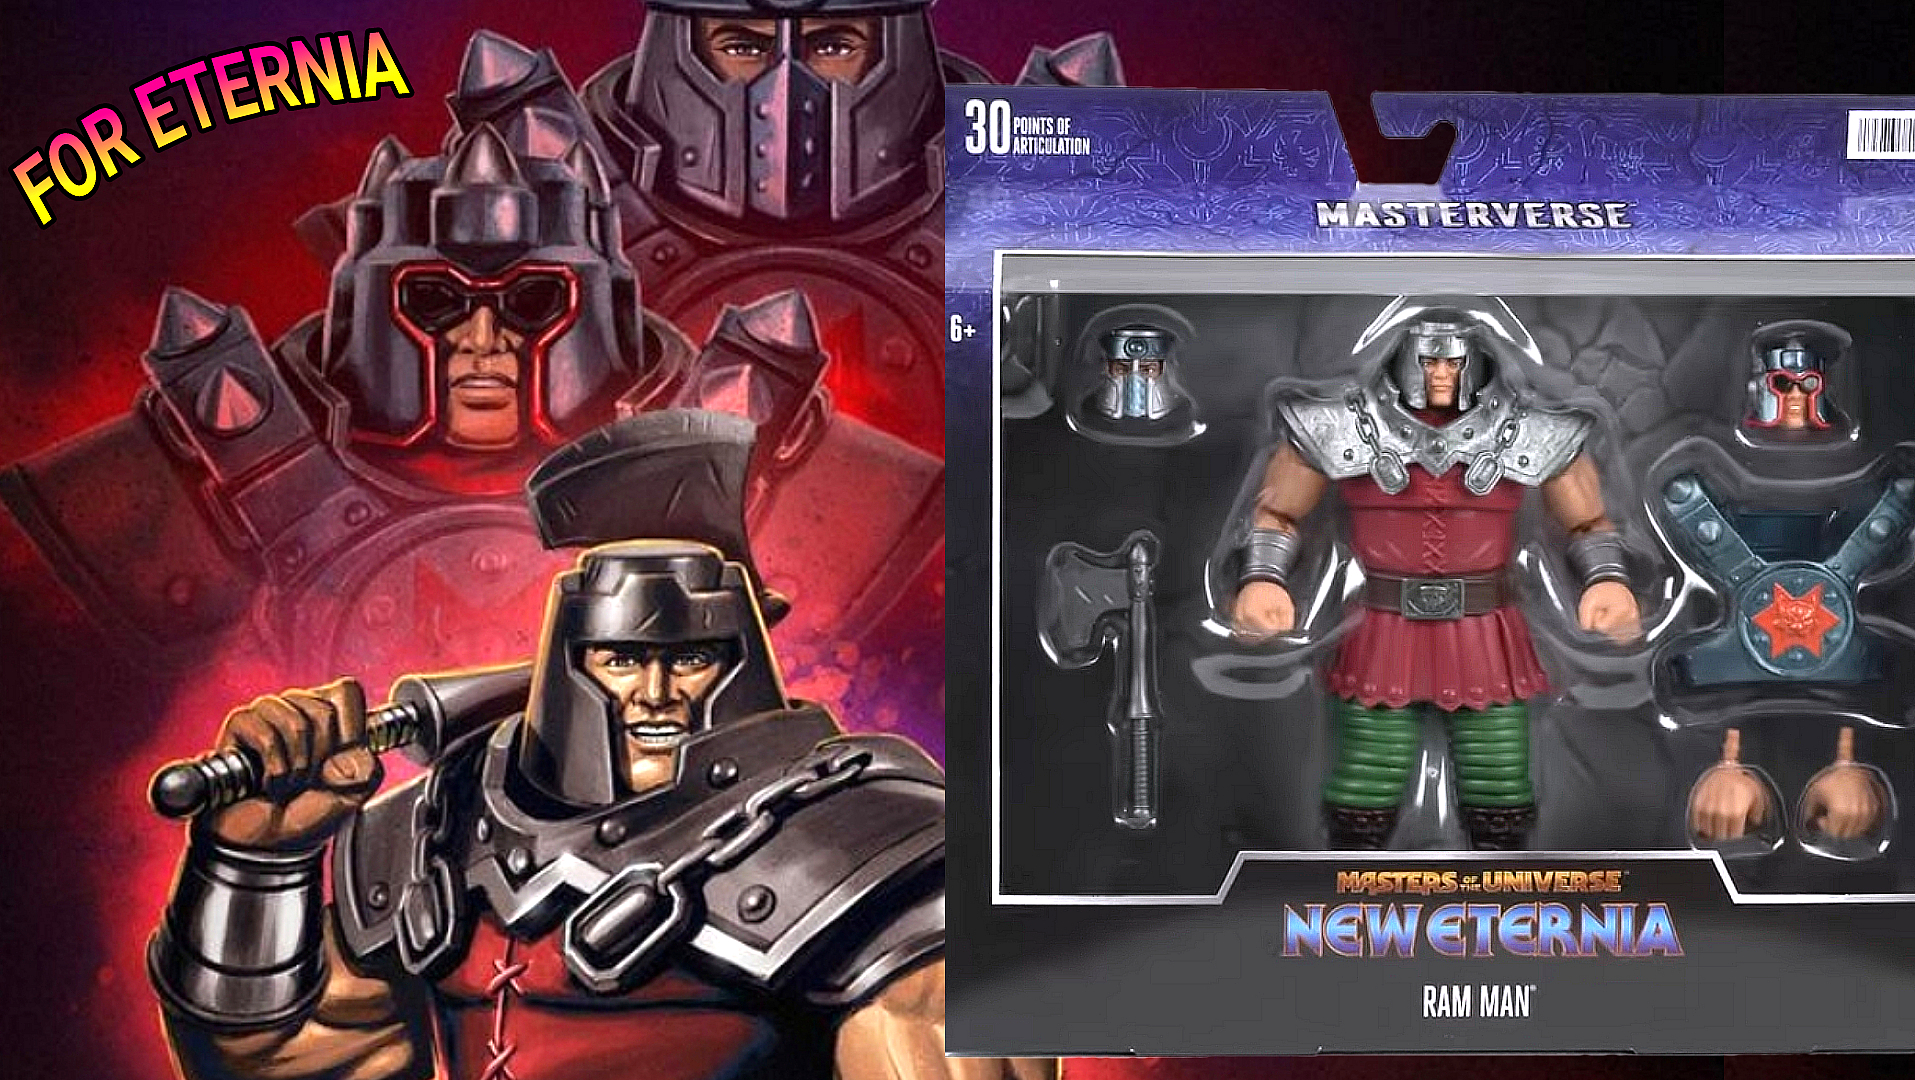 MASTERVERSE New Eternia Ram Man Packaging & Artwork confirms it’s a Wave 9 Deluxe